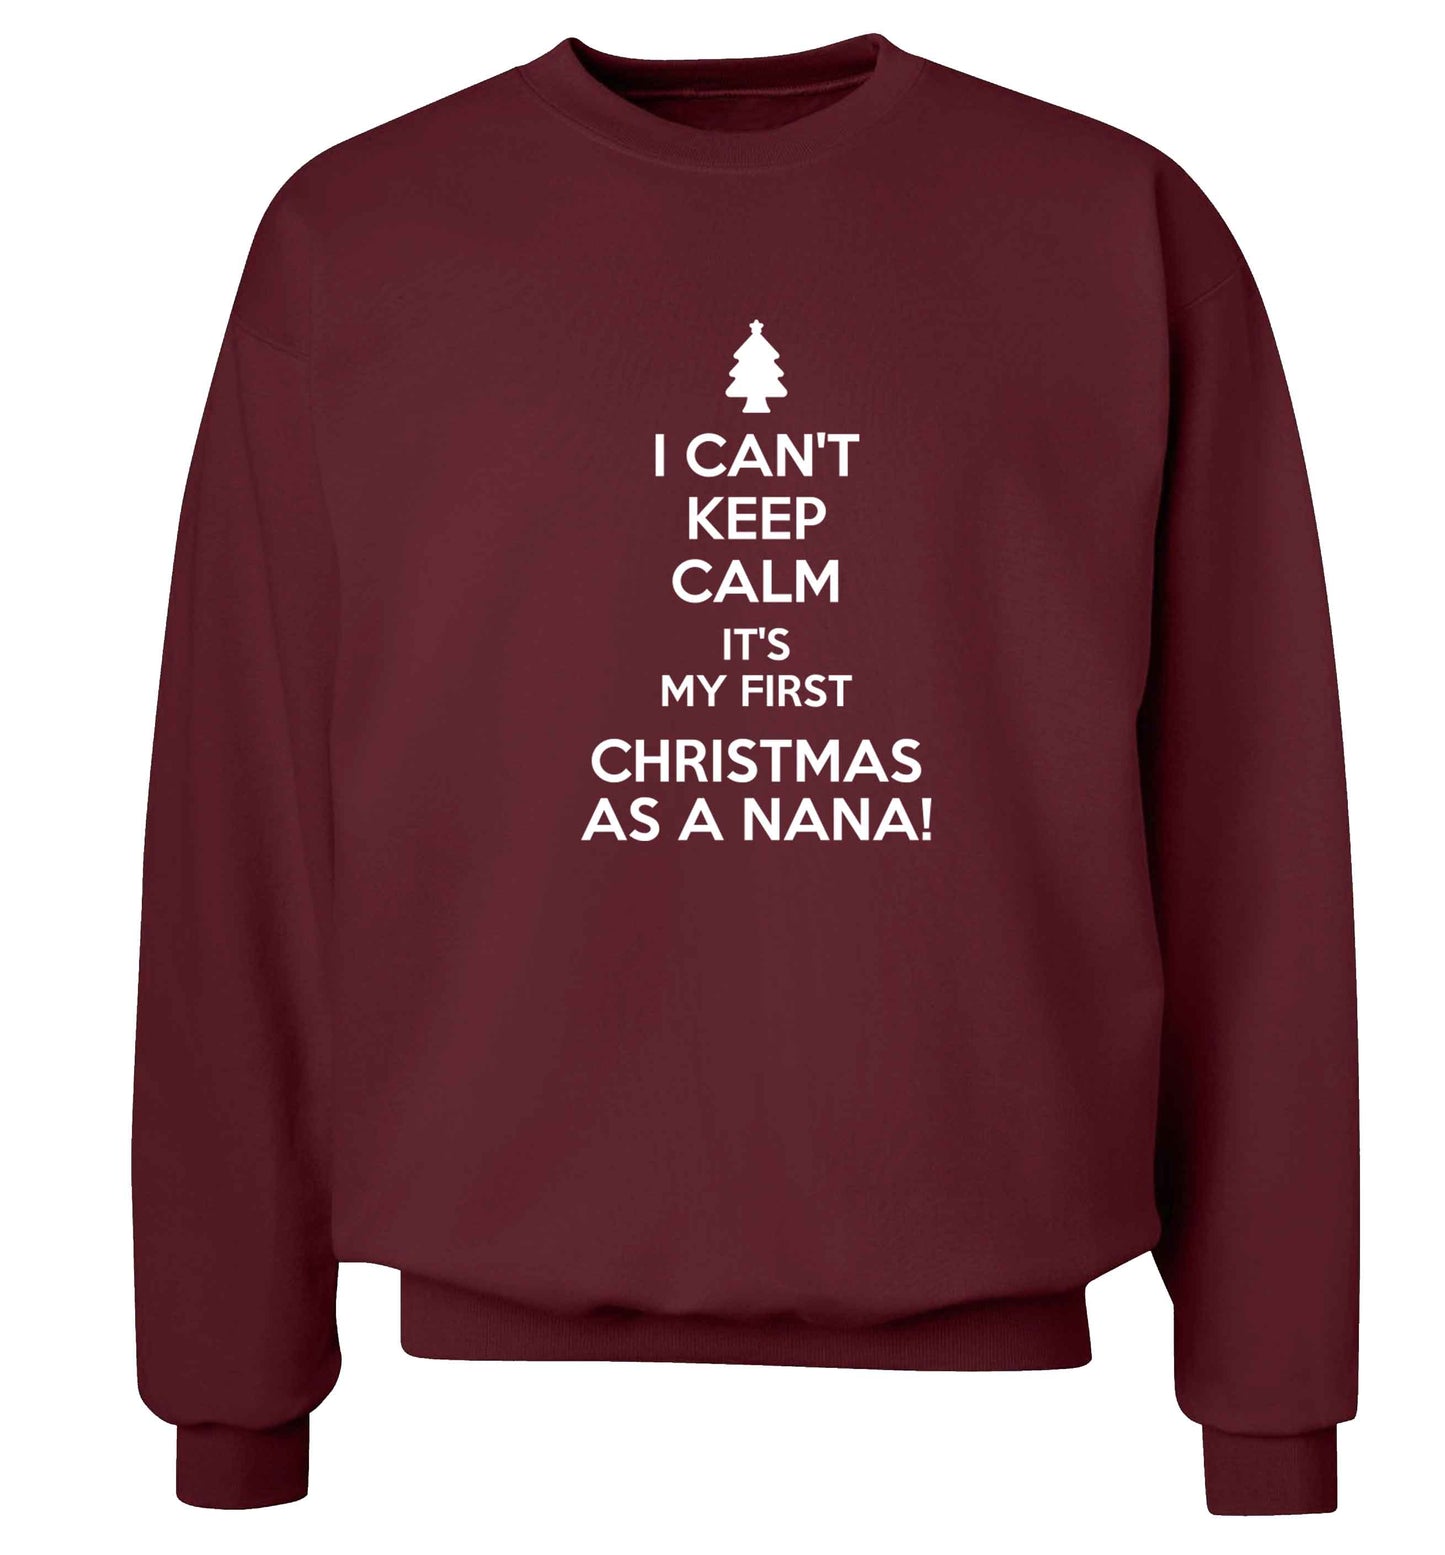 I can't keep calm it's my first Christmas as a nana! Adult's unisex maroon Sweater 2XL